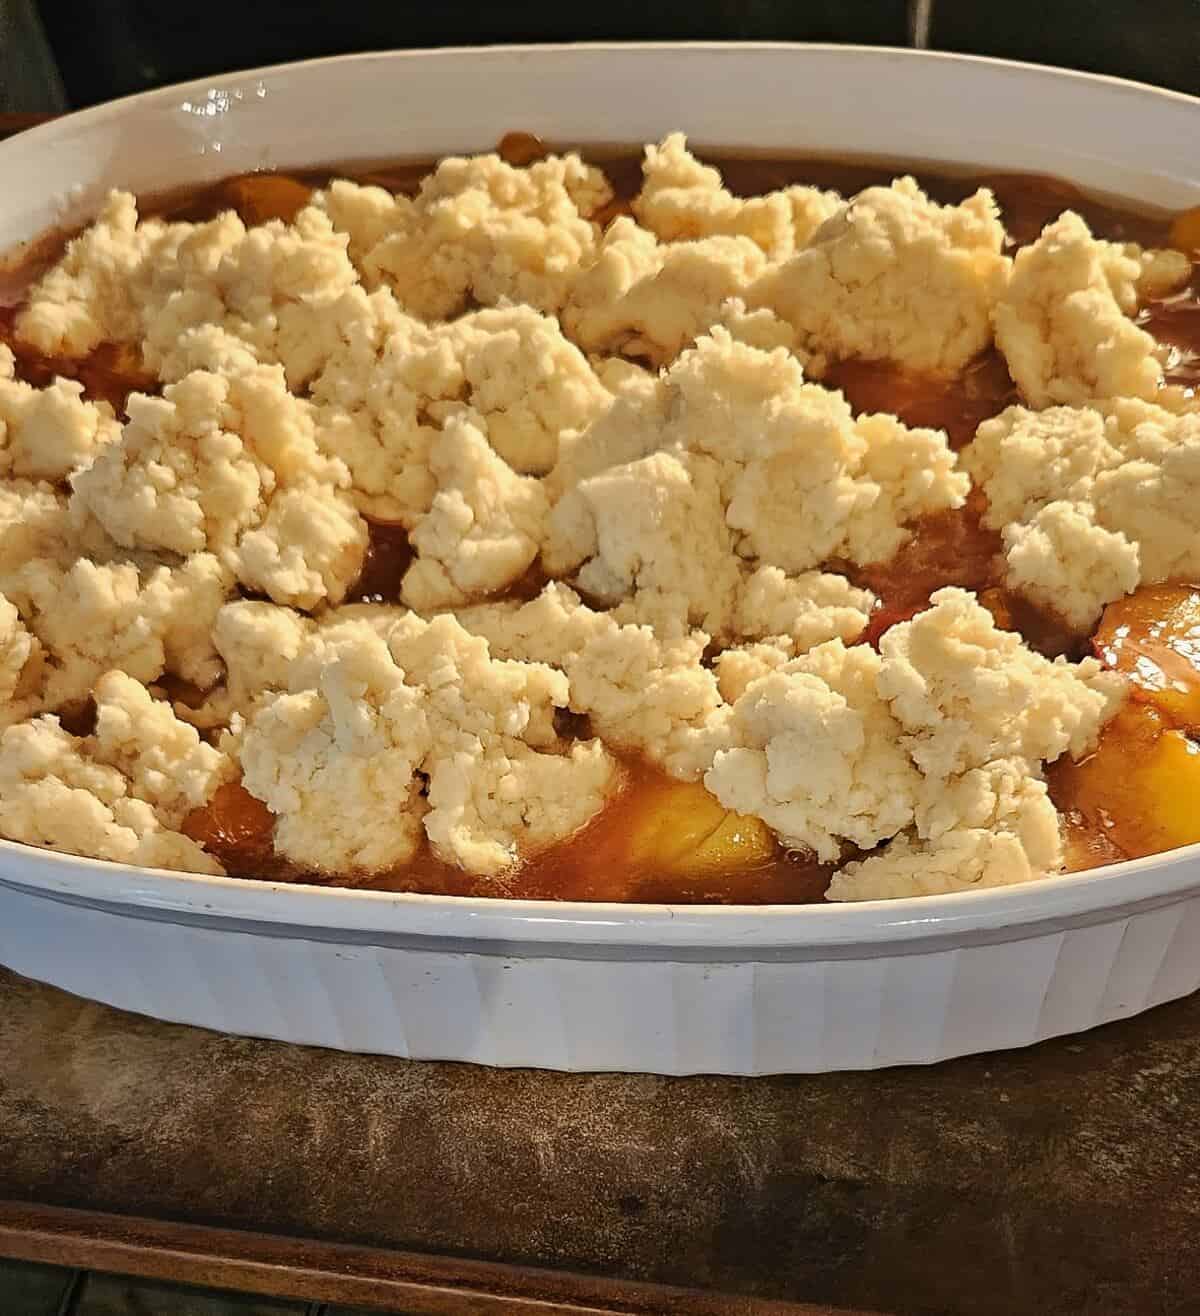 unbaked cobbler in pan with sheet pan under it